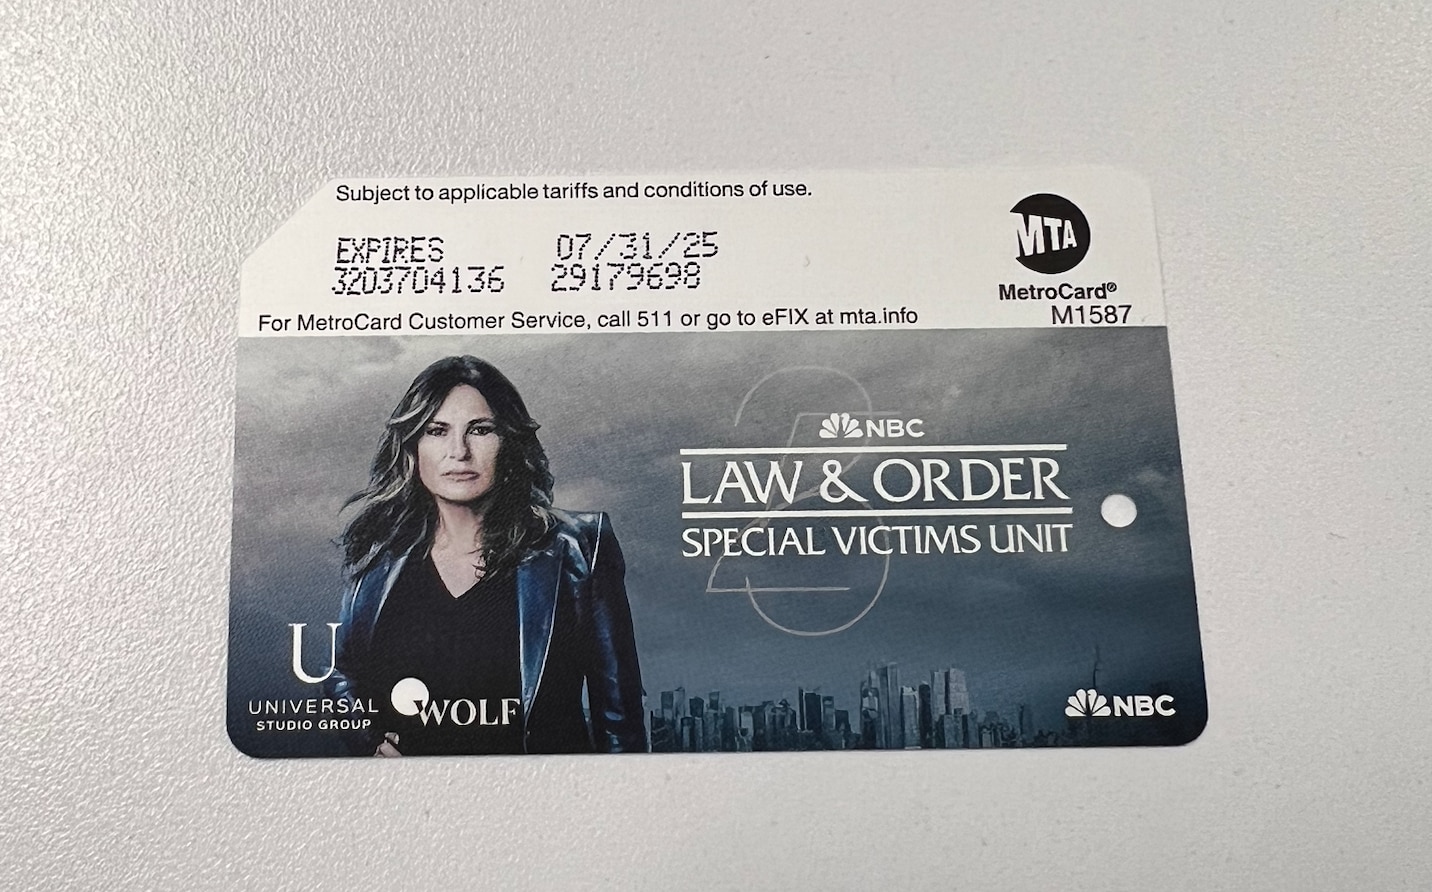 PHOTOS: MTA to Celebrate 25th Anniversary of “Law & Order: Special Victims Unit” with Commemorative MetroCards 